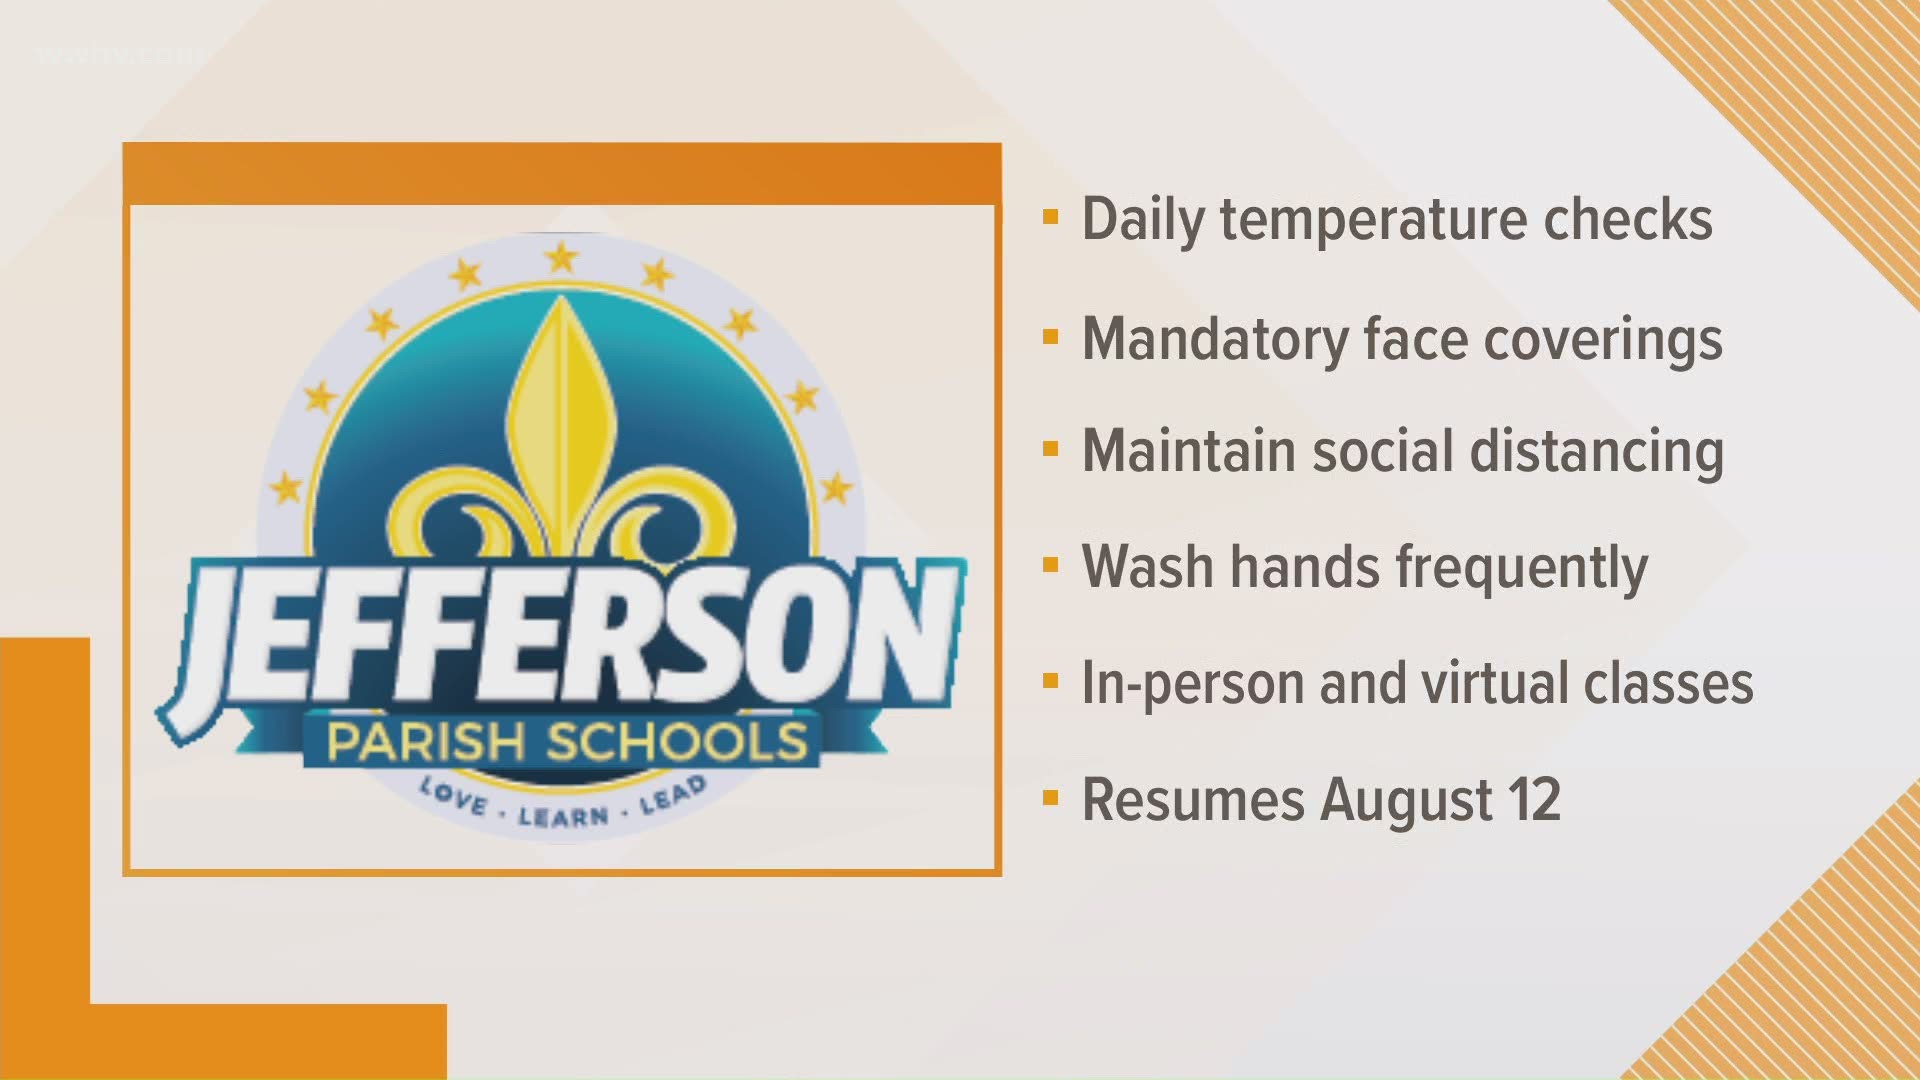 All employees and students will have daily temperature checks, must wear face coverings, maintain social distancing and wash hands frequently.